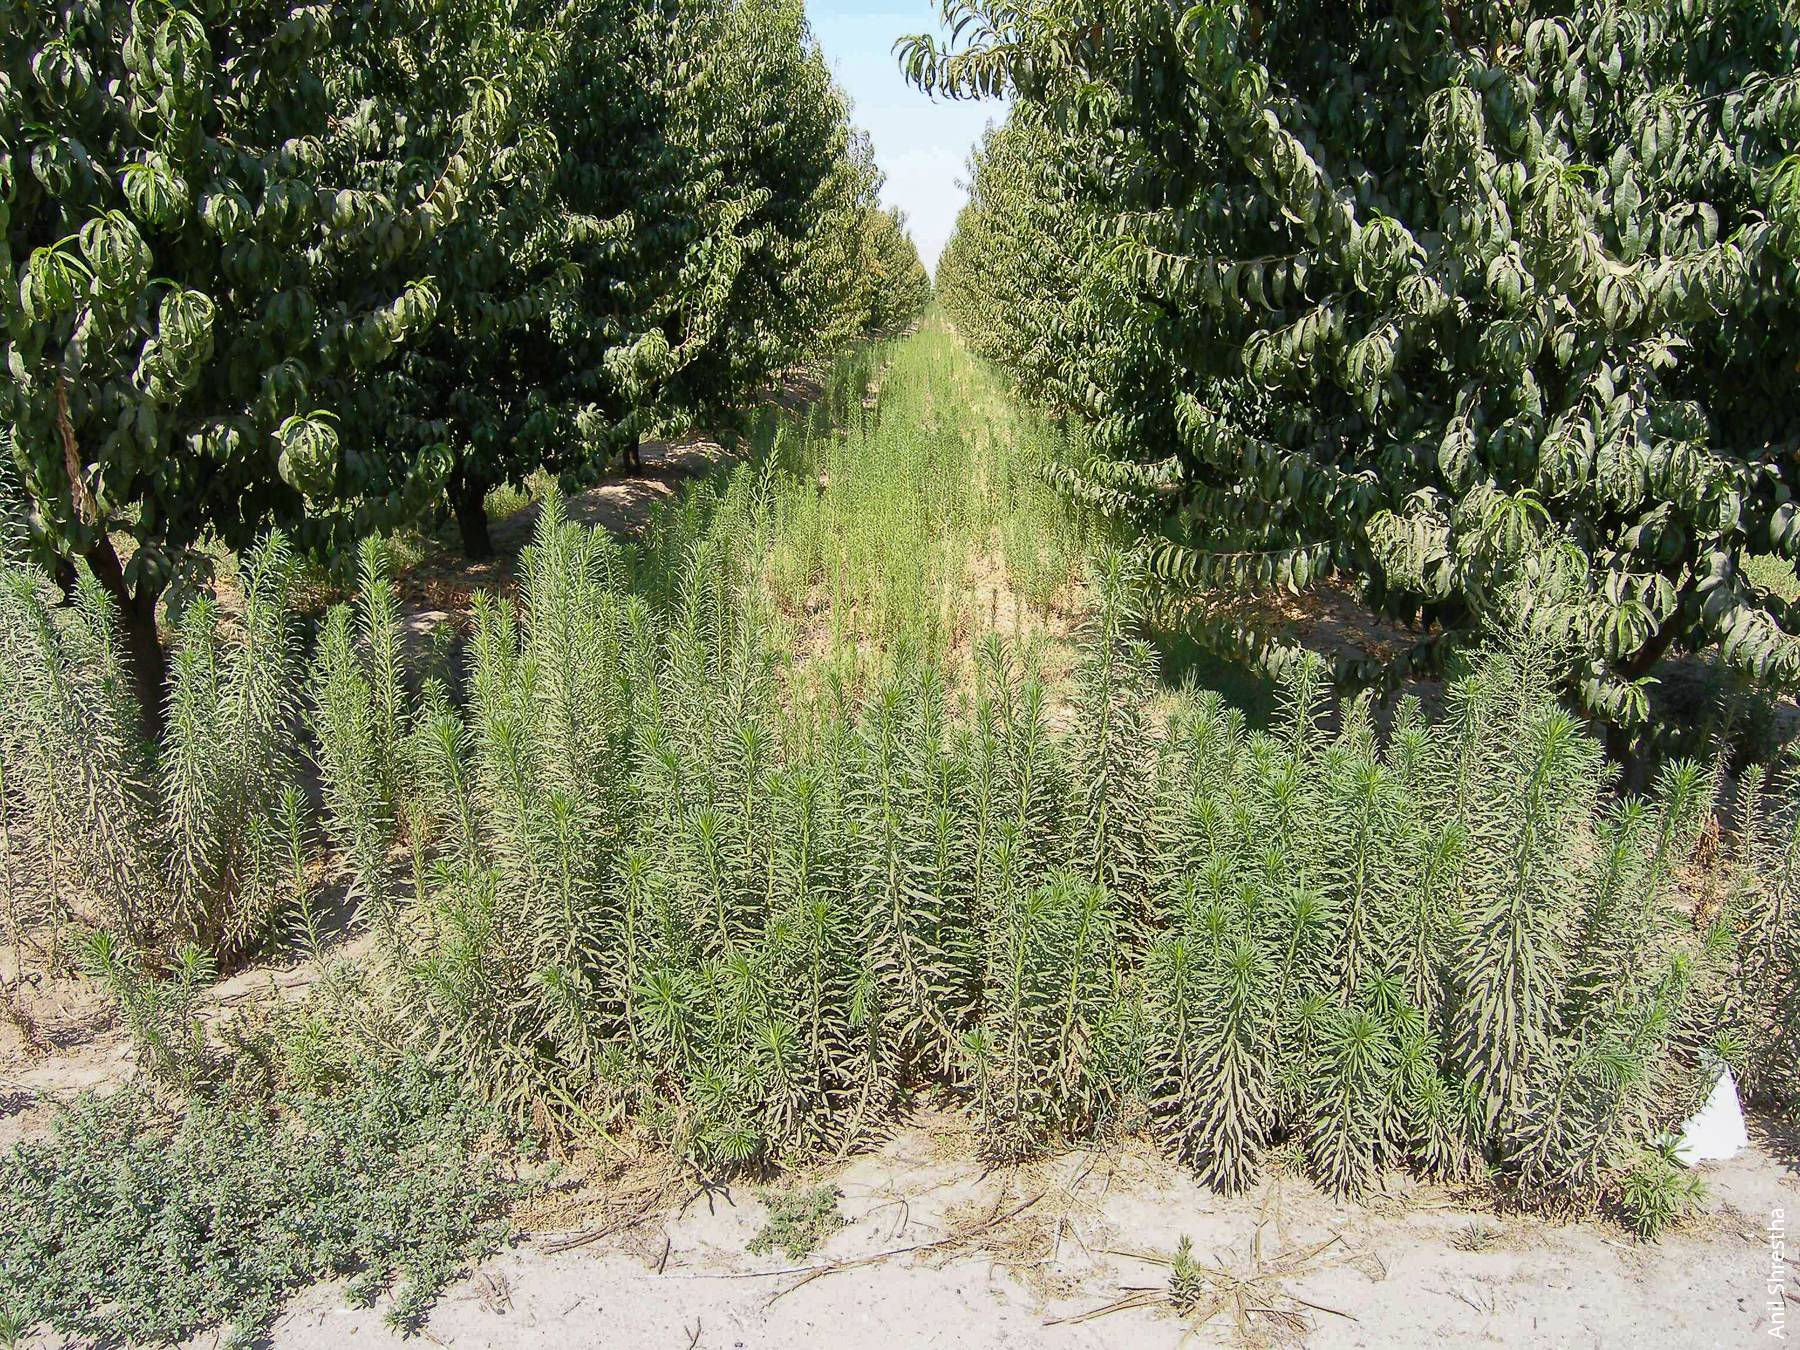 A stone fruit orchard in Fresno County is dominated by glyphosate-resistant horseweed. Reliance on one method of weed control imposes selection pressure, which can lead to population shifts to tolerant species or selection of resistant biotypes.